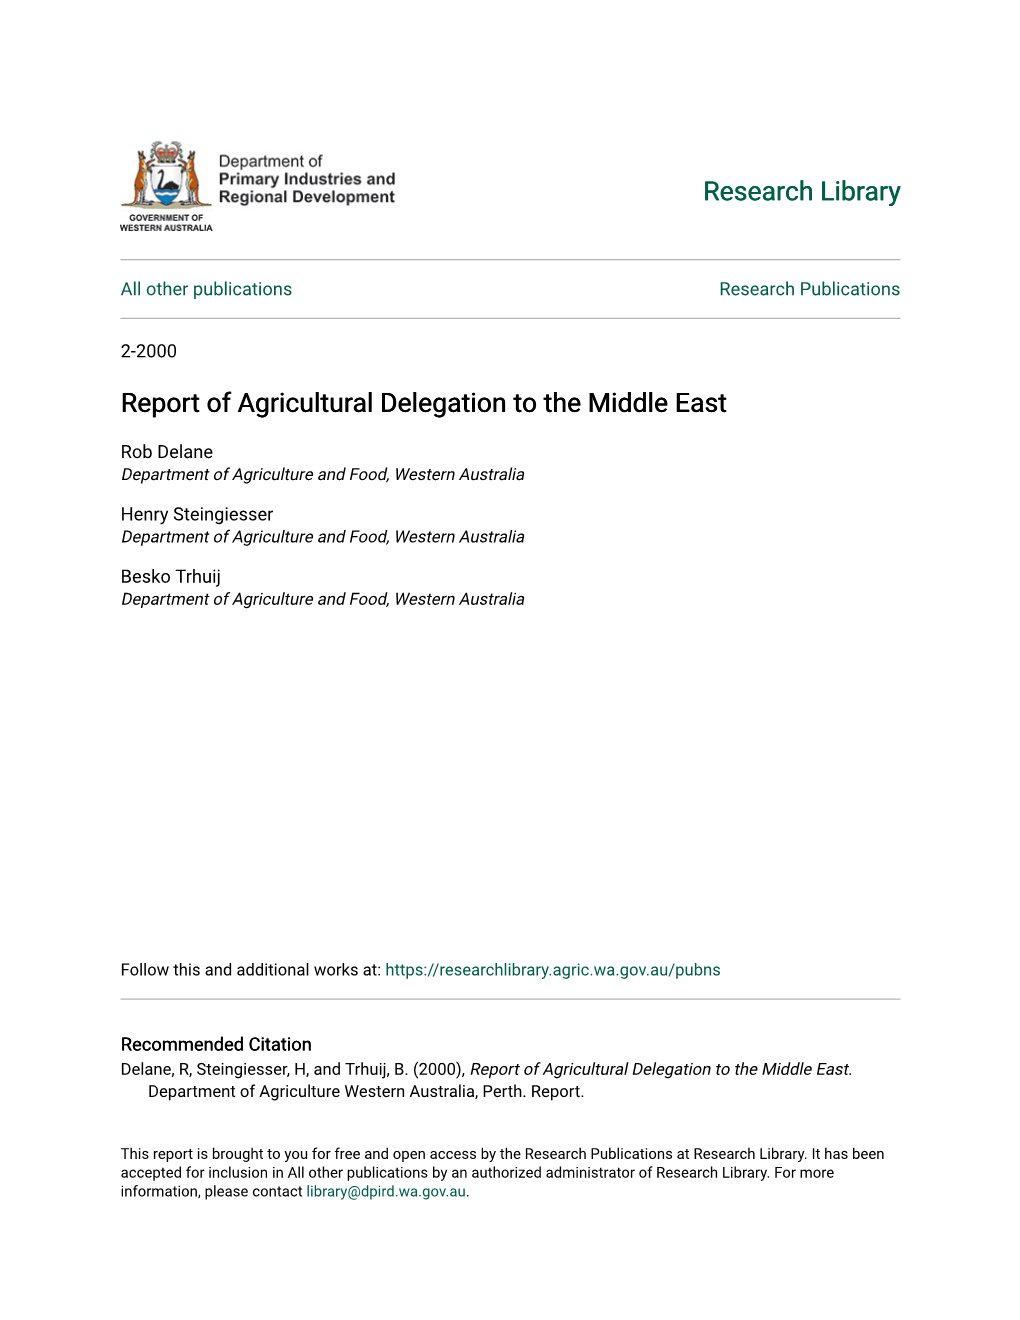 Report of Agricultural Delegation to the Middle East